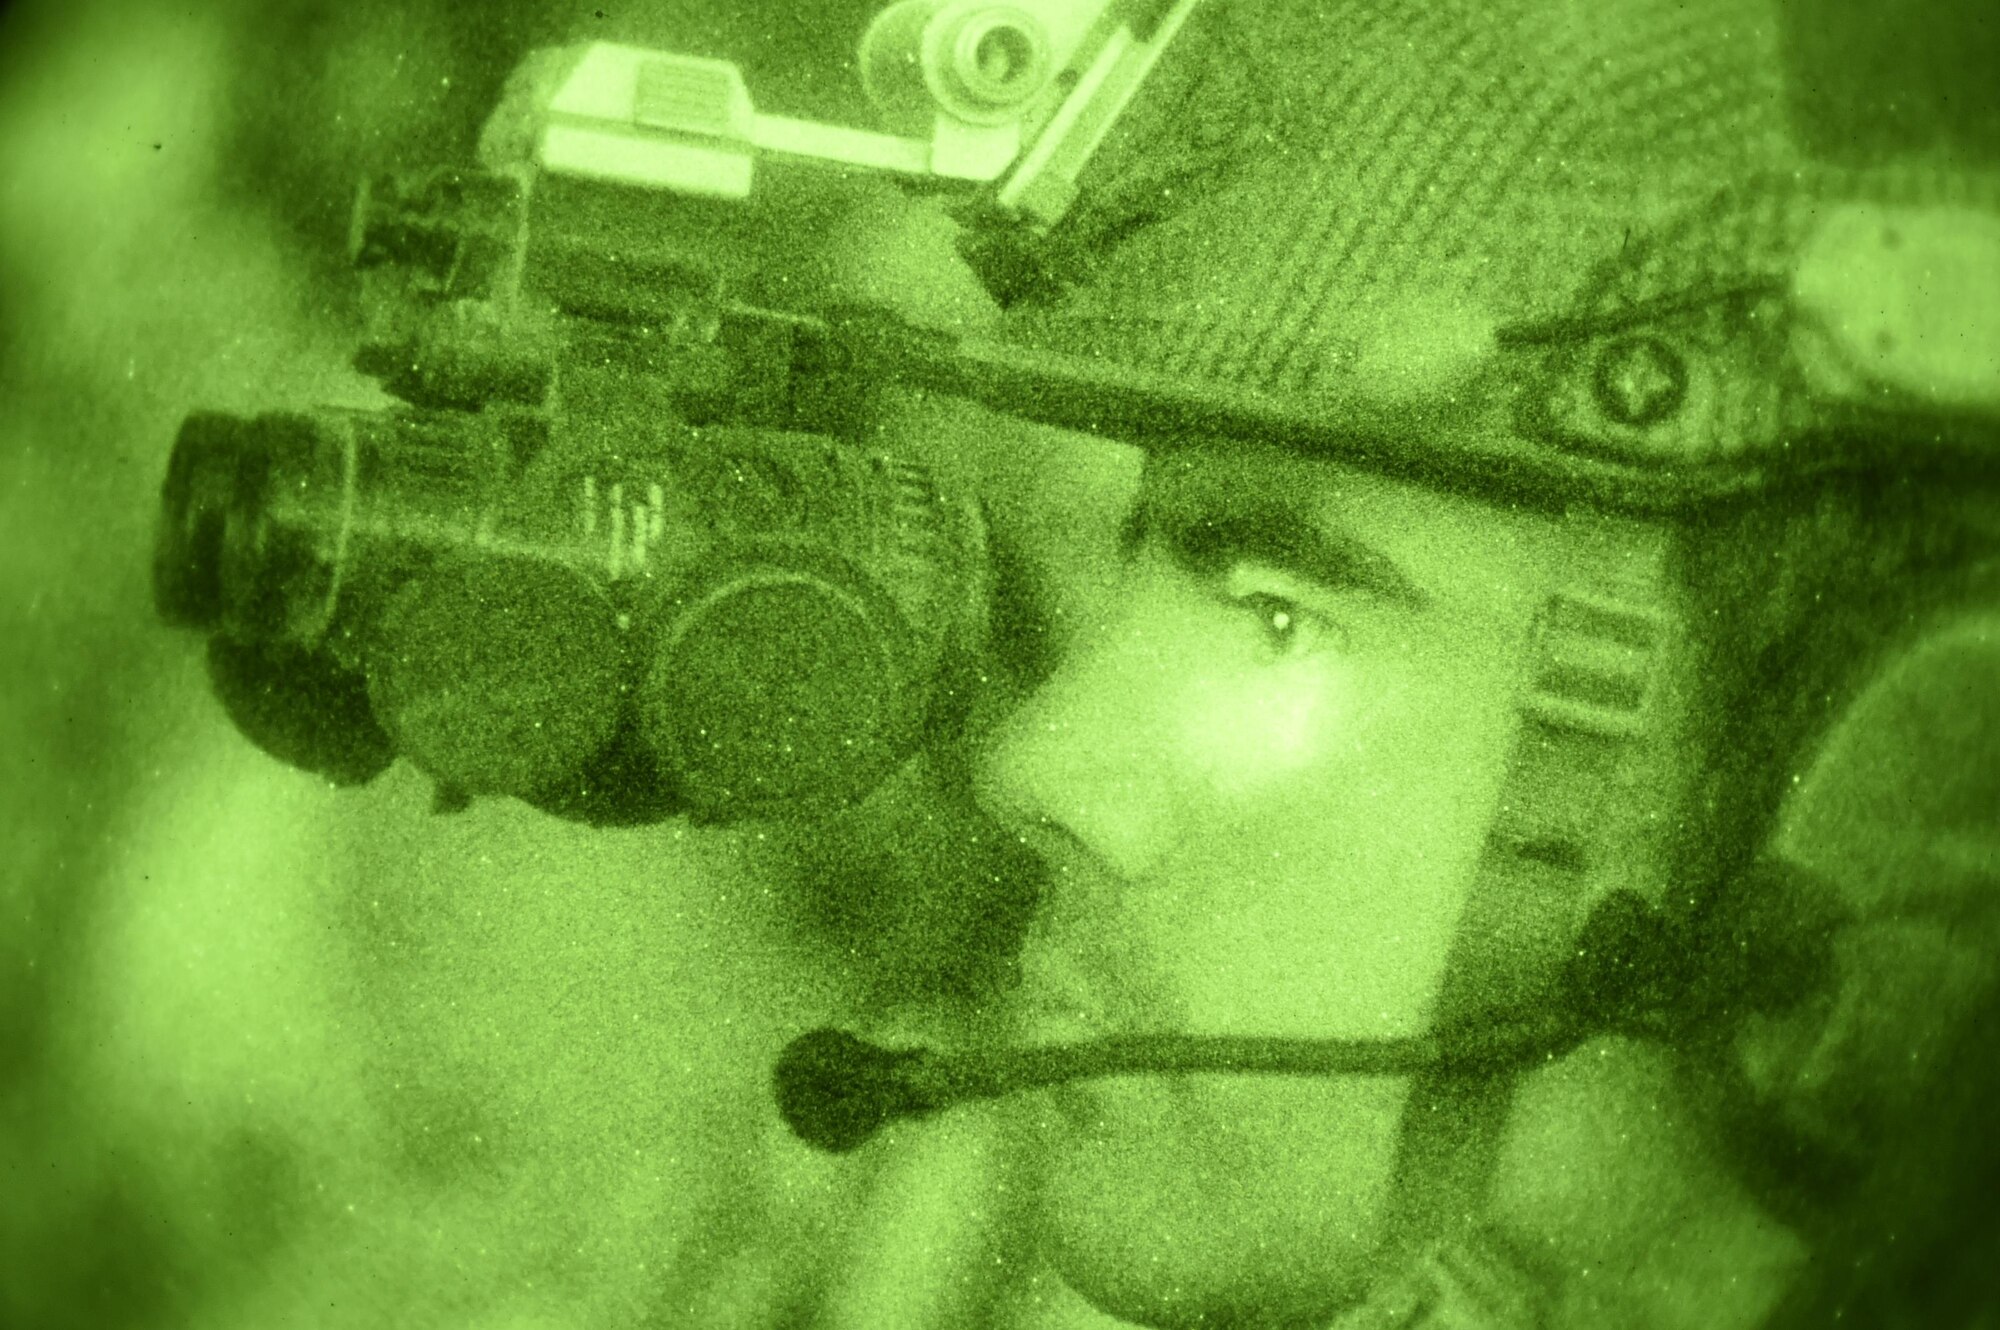 A U.S. Air Force combat controller, 21st Special Tactics Squadron, observes an AC-130 Gunship conduct a live-fire mission during Emerald Warrior at Camp Shelby, Miss., April 22, 2015. Emerald Warrior 2015 is the Department of Defense's only irregular warfare exercise, allowing joint and combined partners to train together and prepare for real world contingency operations. (U.S. Air Force photo by Staff Sgt. Jonathan Snyder/Released)
